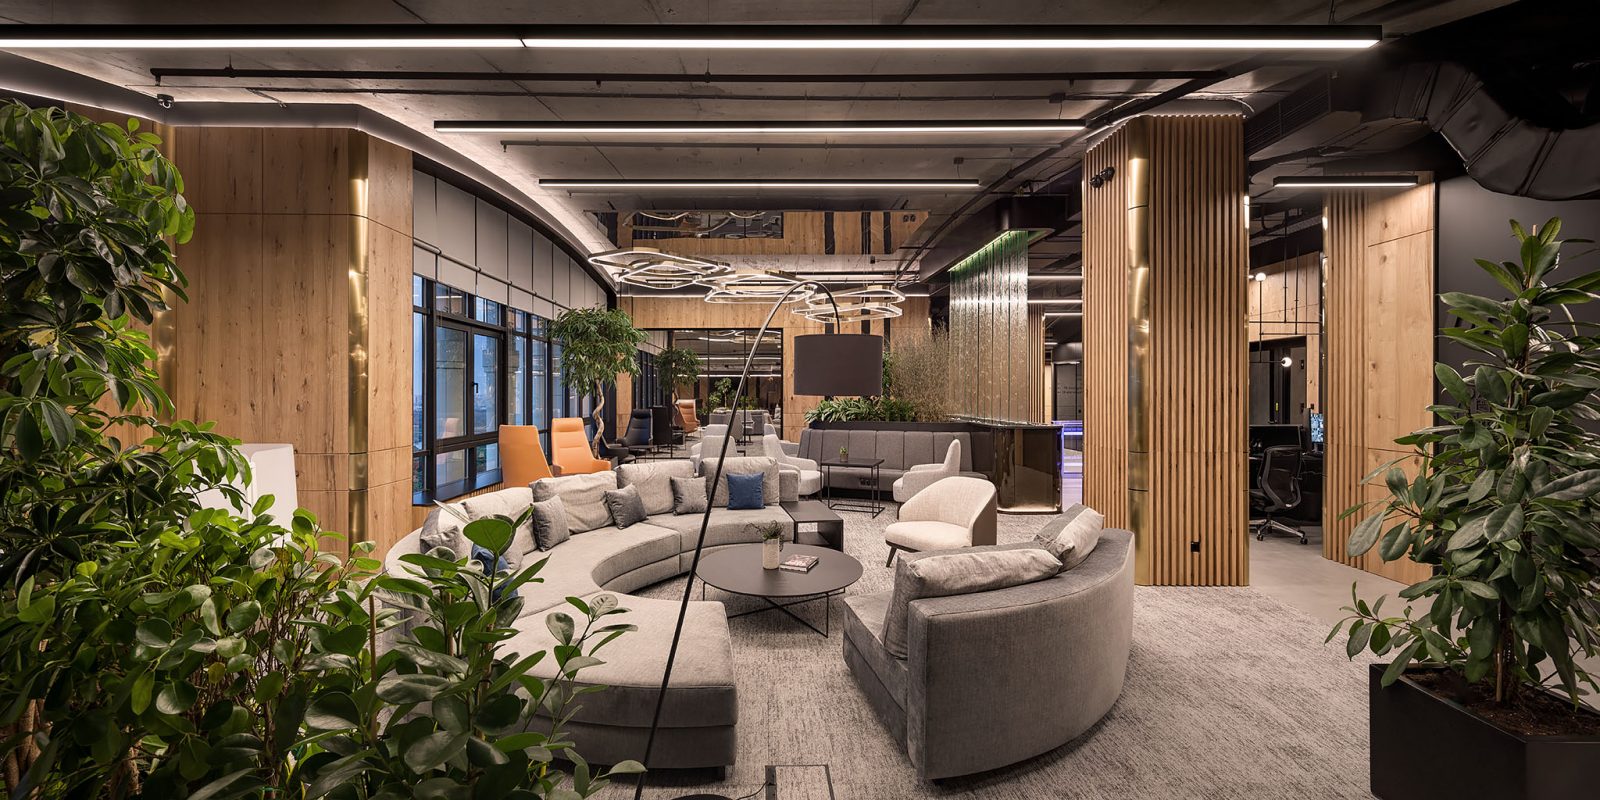 The role of landscaping, lighting and acoustics in a modern office